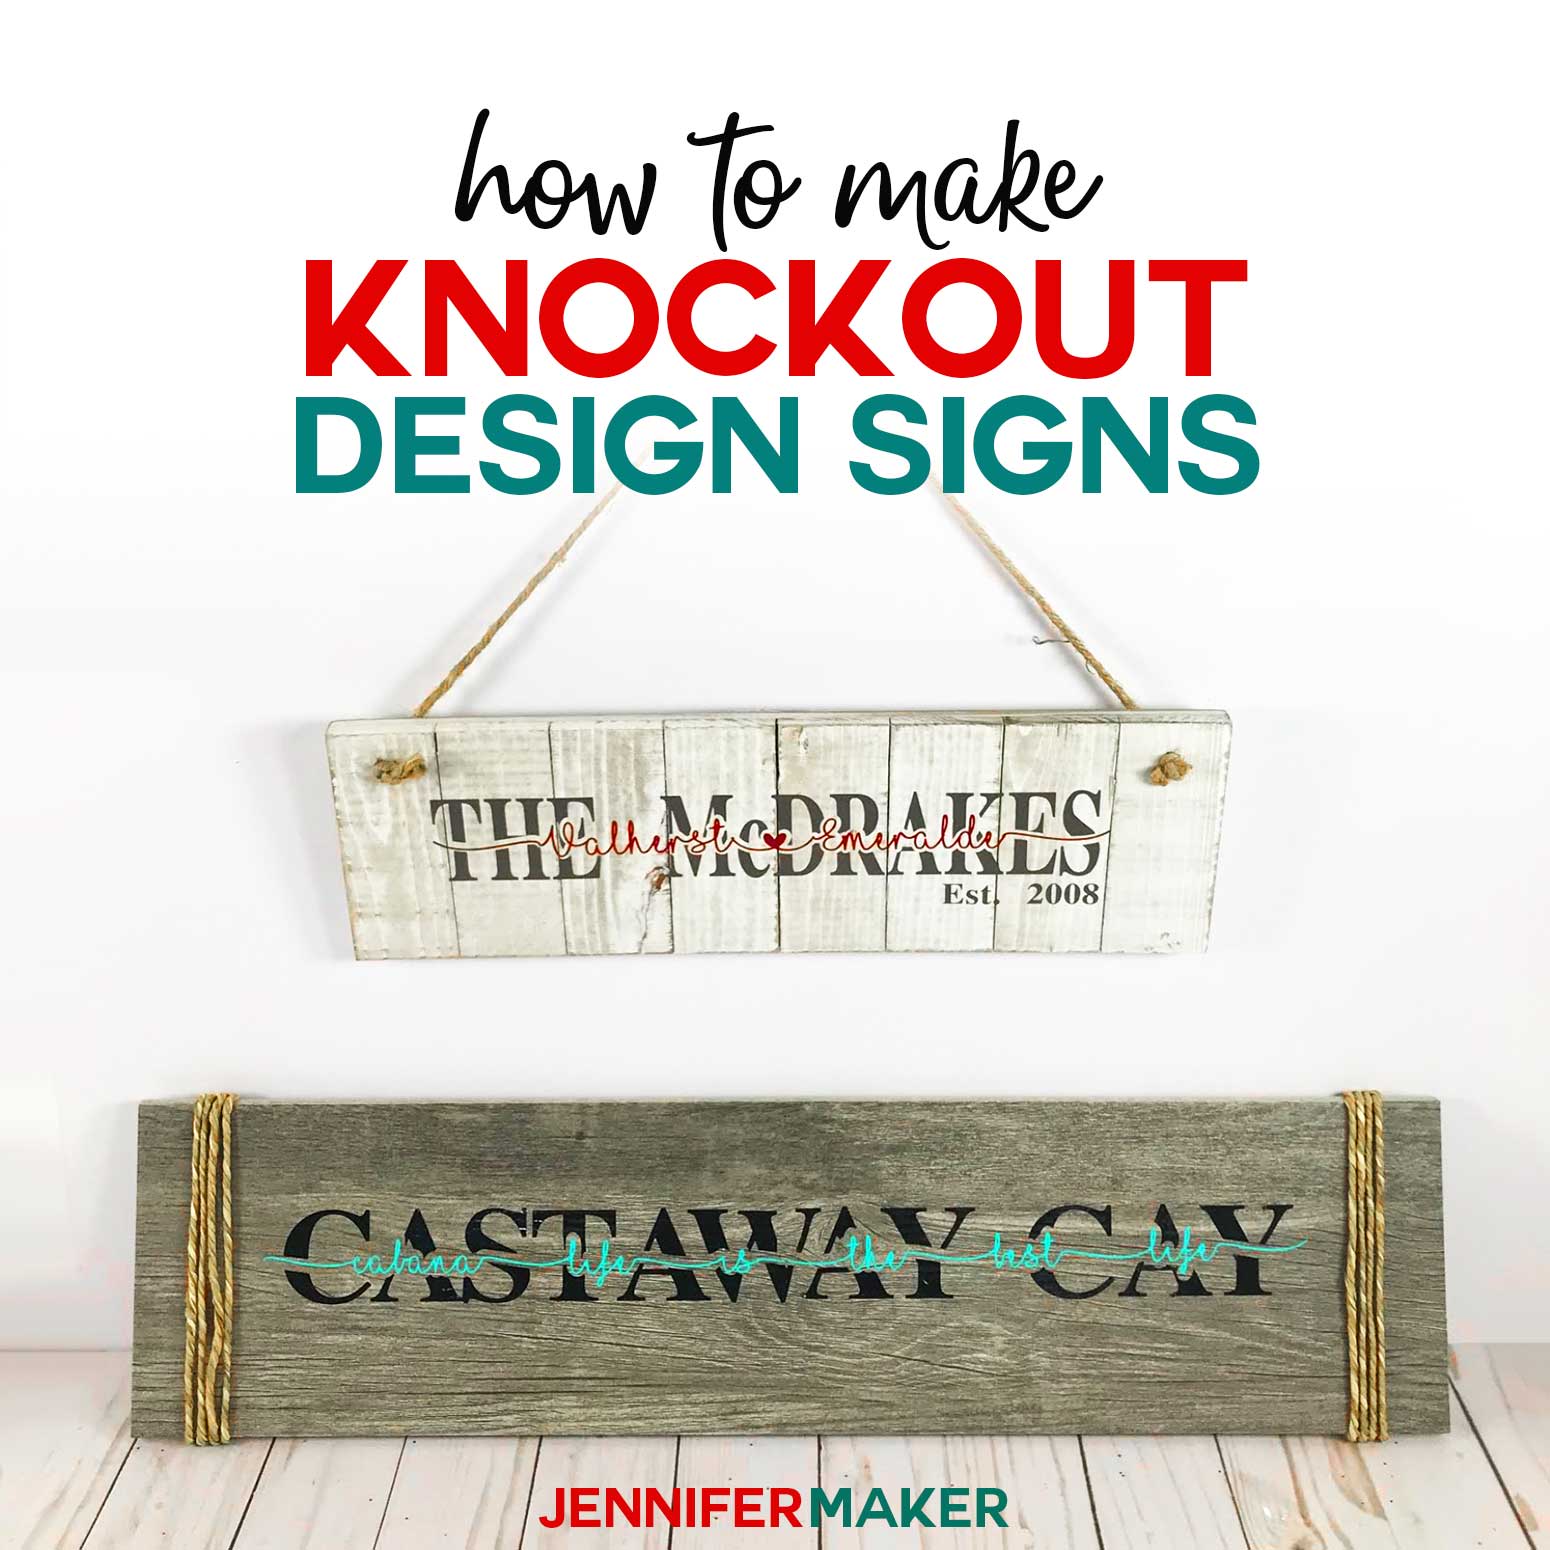 DIY Knockout Design Signs in Cricut Design Space - how to make name signs on ceramic tile #cricut #cricutmade #signs #cricutdesignspace